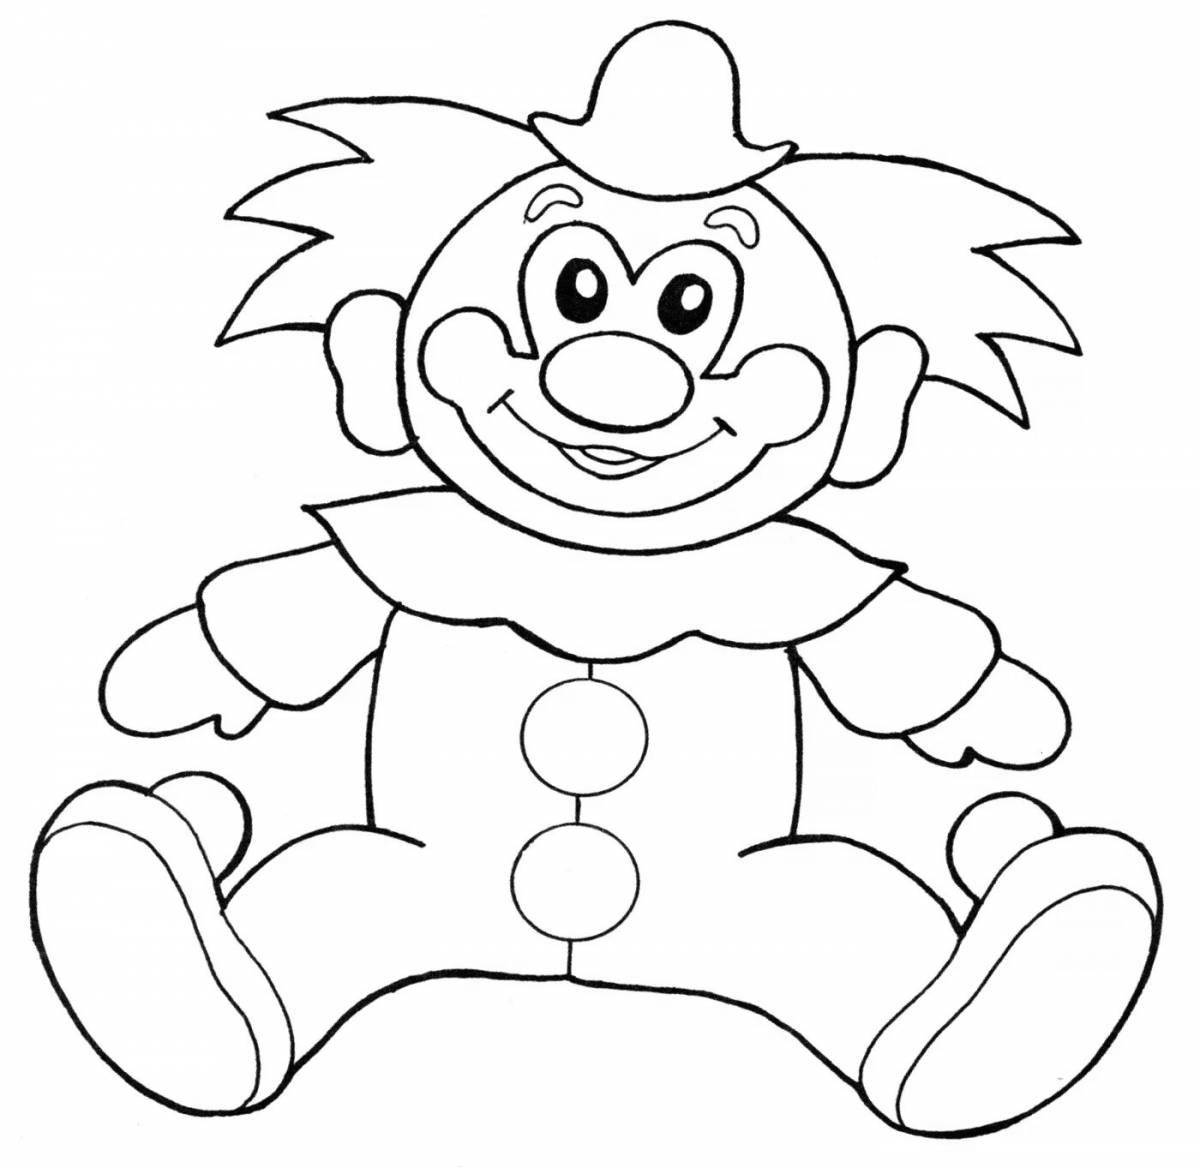 Jester coloring pages for kids